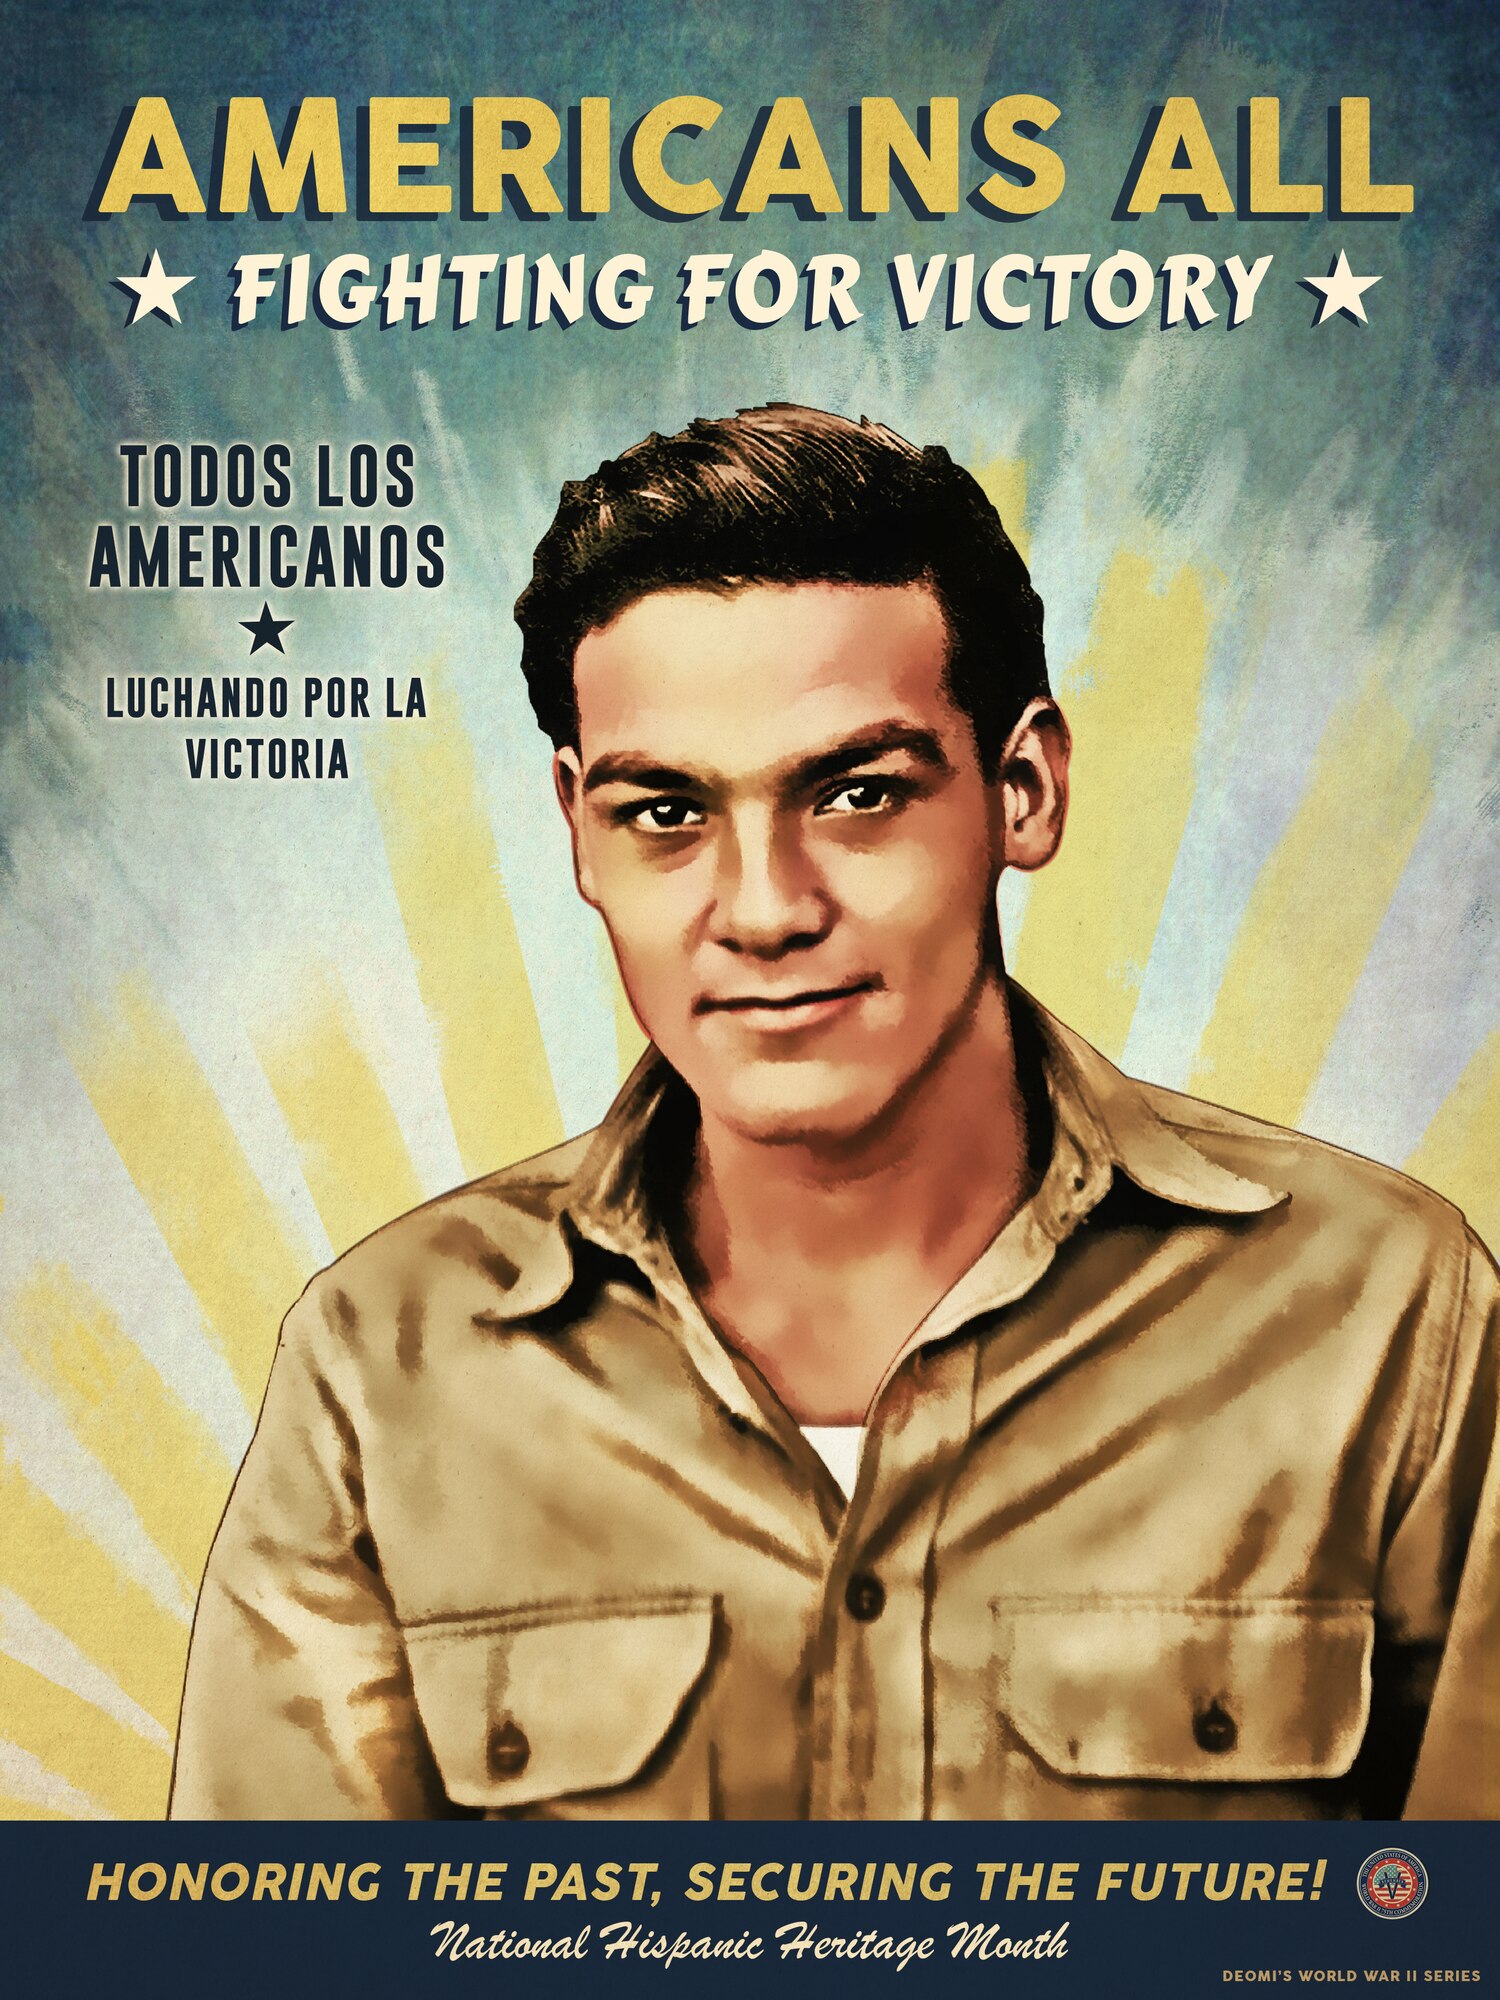 Depicted in the poster is Corporal Julius Casarez. In June of 1942, Casarez was sent via Africa to India, to serve as part of the 703rd Special Forces, a machine-gun battalion.We recognize him in correlation with National Hispanic Heritage Month, formerly known as Hispanic Heritage Week, has been celebrated for more than 50 years and dates back to 1968. In 1988, during the President Ronald Reagan administration the observance period, that was once only a week extended to a month and received its new name. Since then, National Hispanic Heritage Month begins every 15th of September and ends the 15th of October. During this month members pay respect to the Americans who sacrificed themselves for this nation.